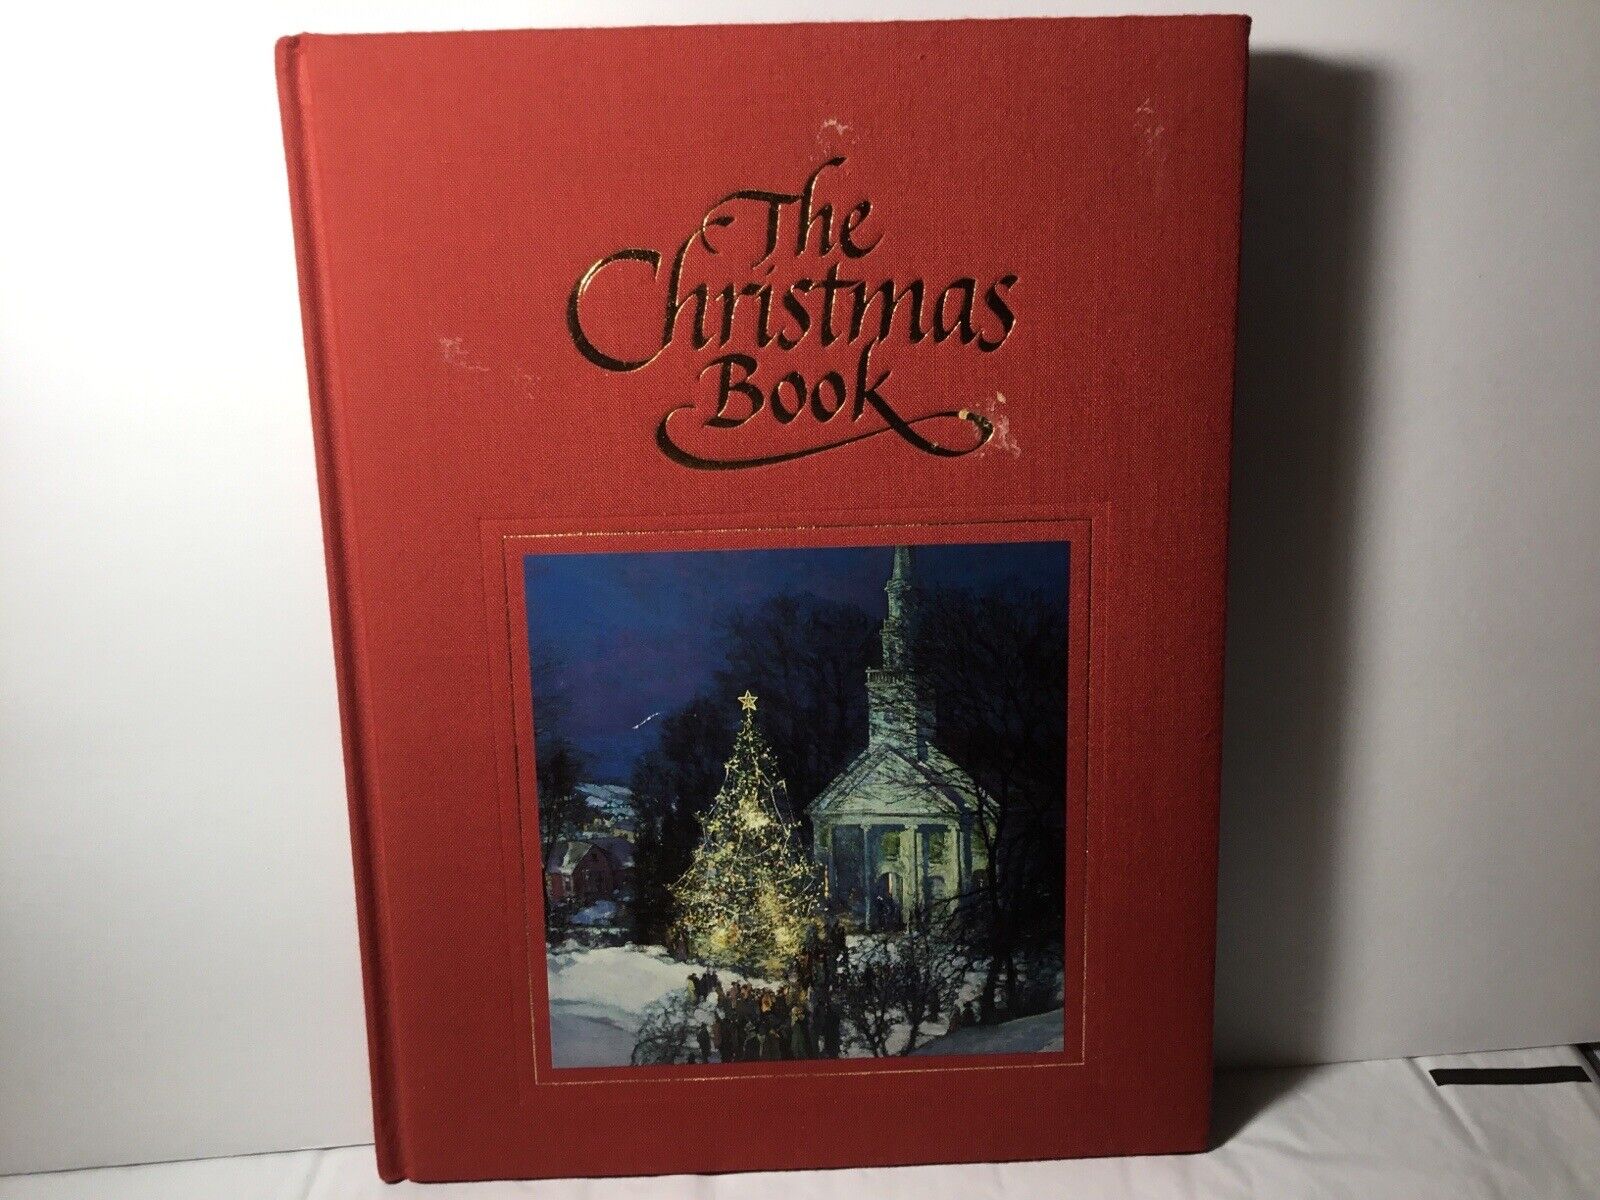 The Christmas Book by Marcia O. Martin